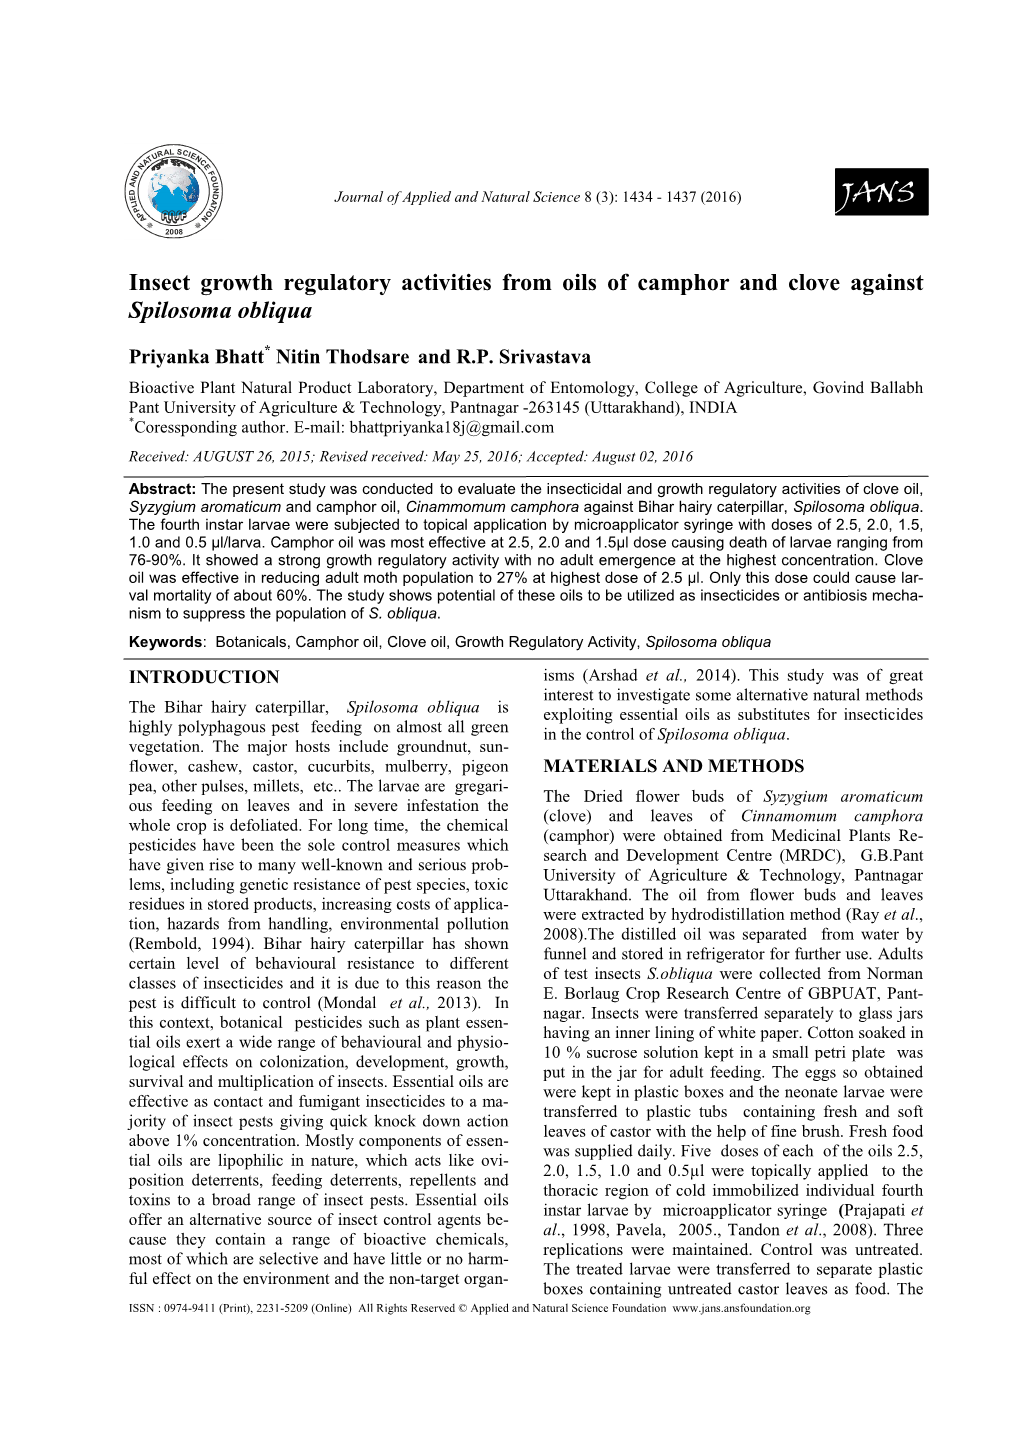 Insect Growth Regulatory Activities from Oils of Camphor and Clove Against Spilosoma Obliqua